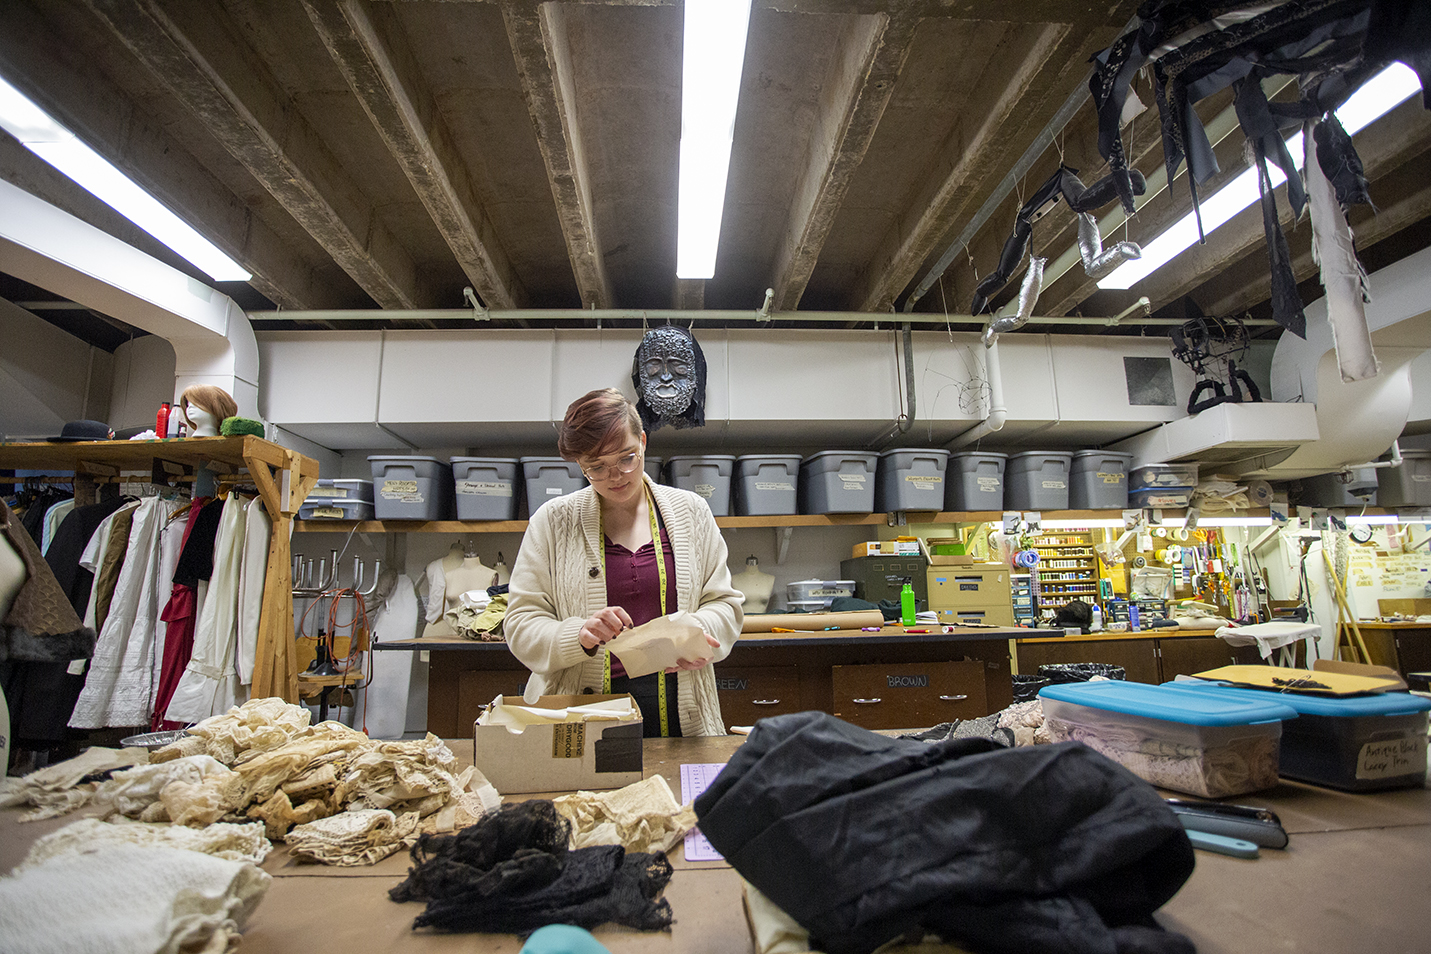 A student technician in the costume shop organizes lace